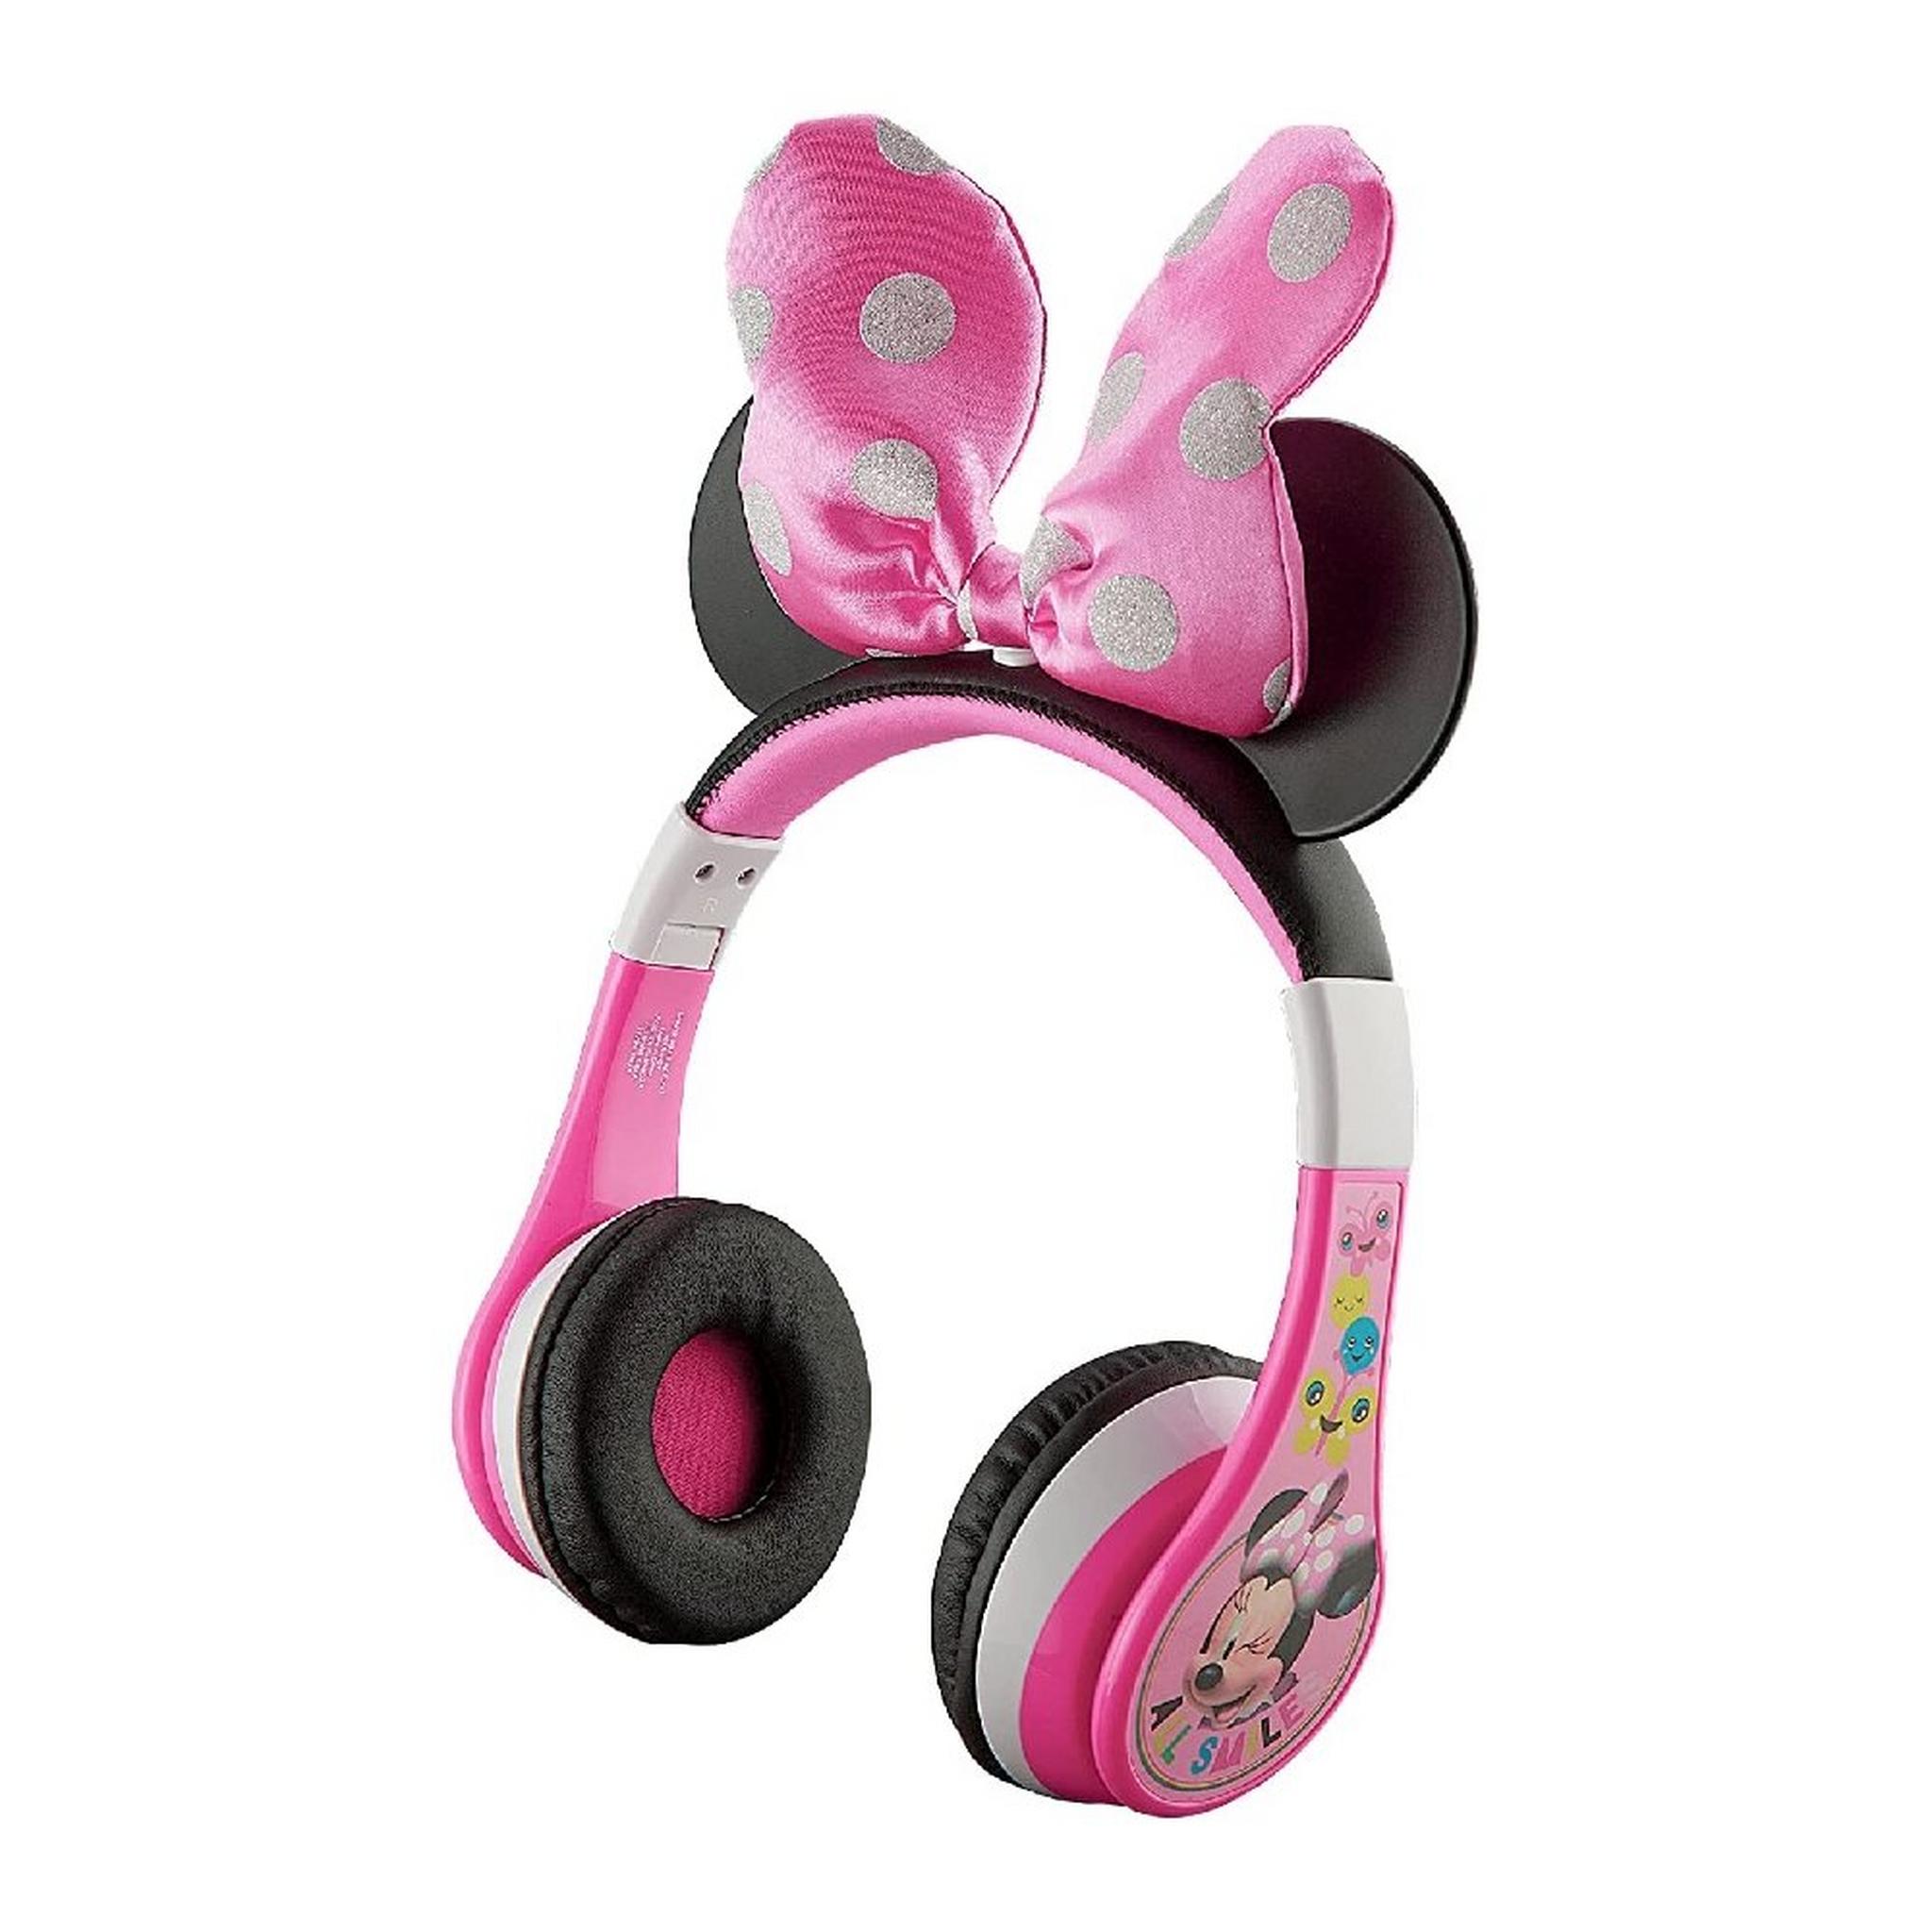 Minnie Mouse Kids Bluetooth Headphones, Wireless Headphones with Microphone Includes Aux Cord - KD-MM-B52, multicolor